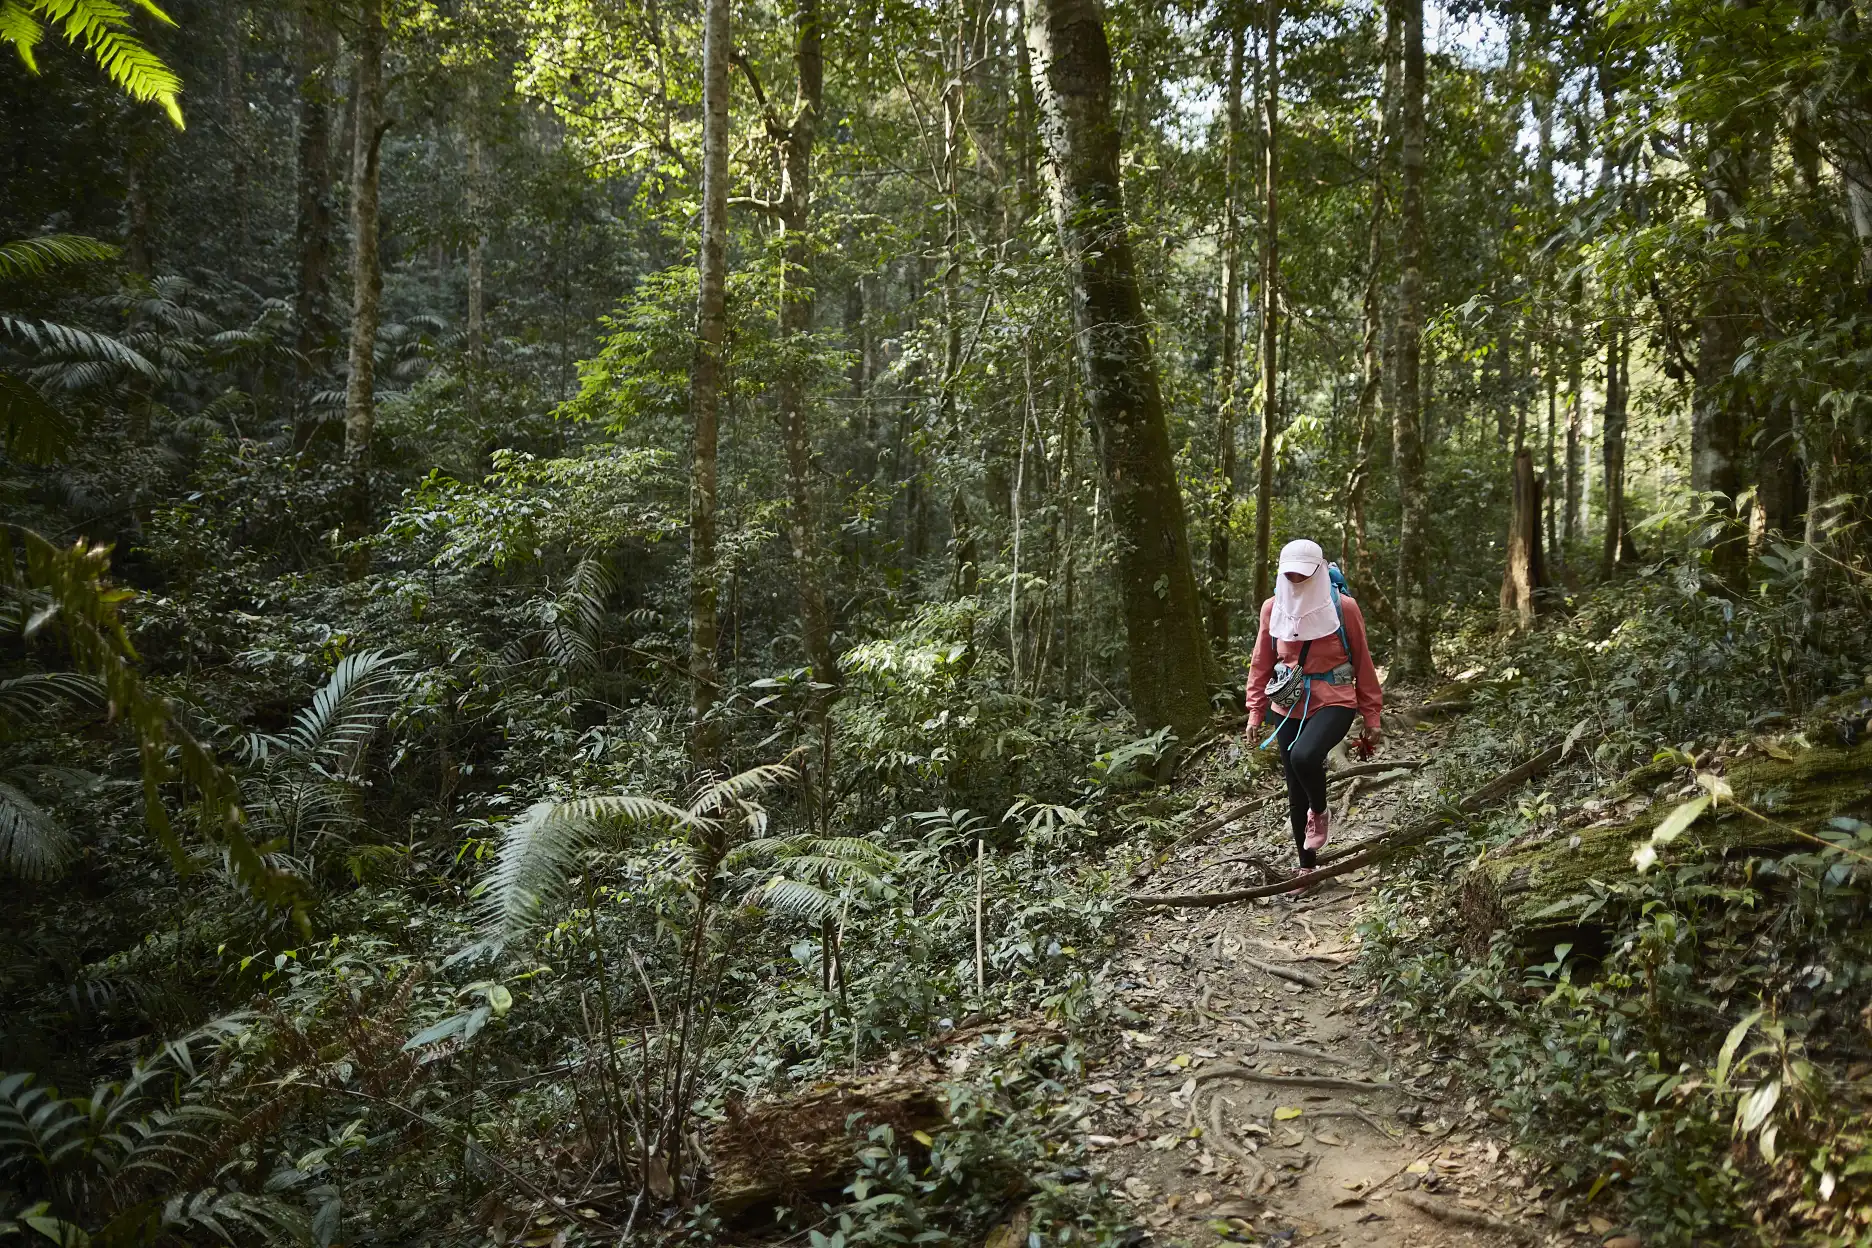 Forest trail in Phu Kradueng National Park